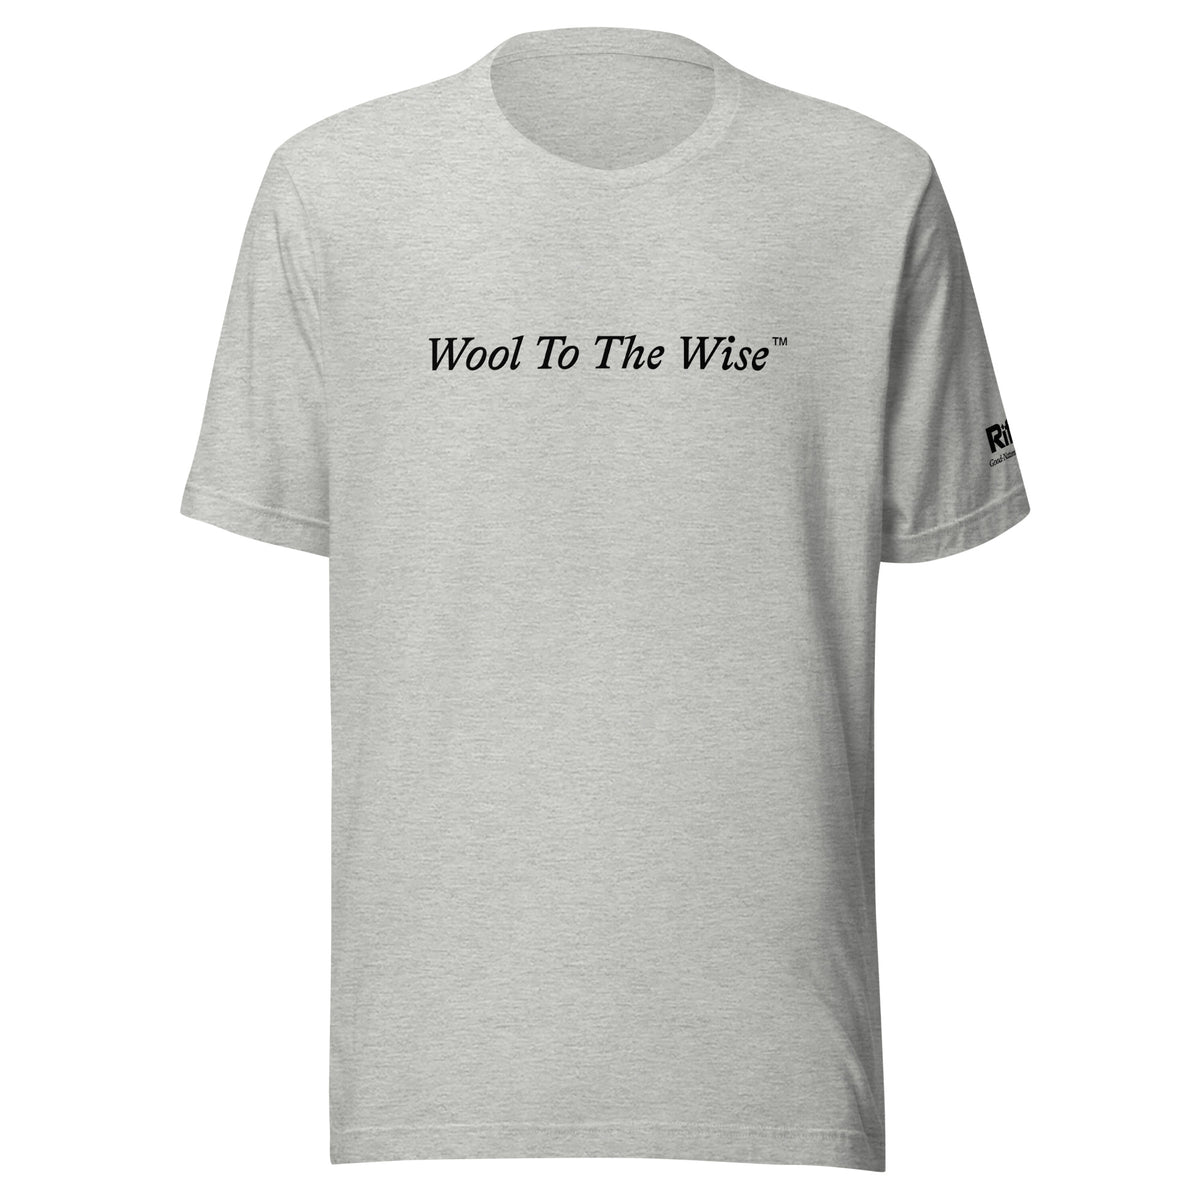 Ritter - Unisex Wool To The Wise T-Shirt